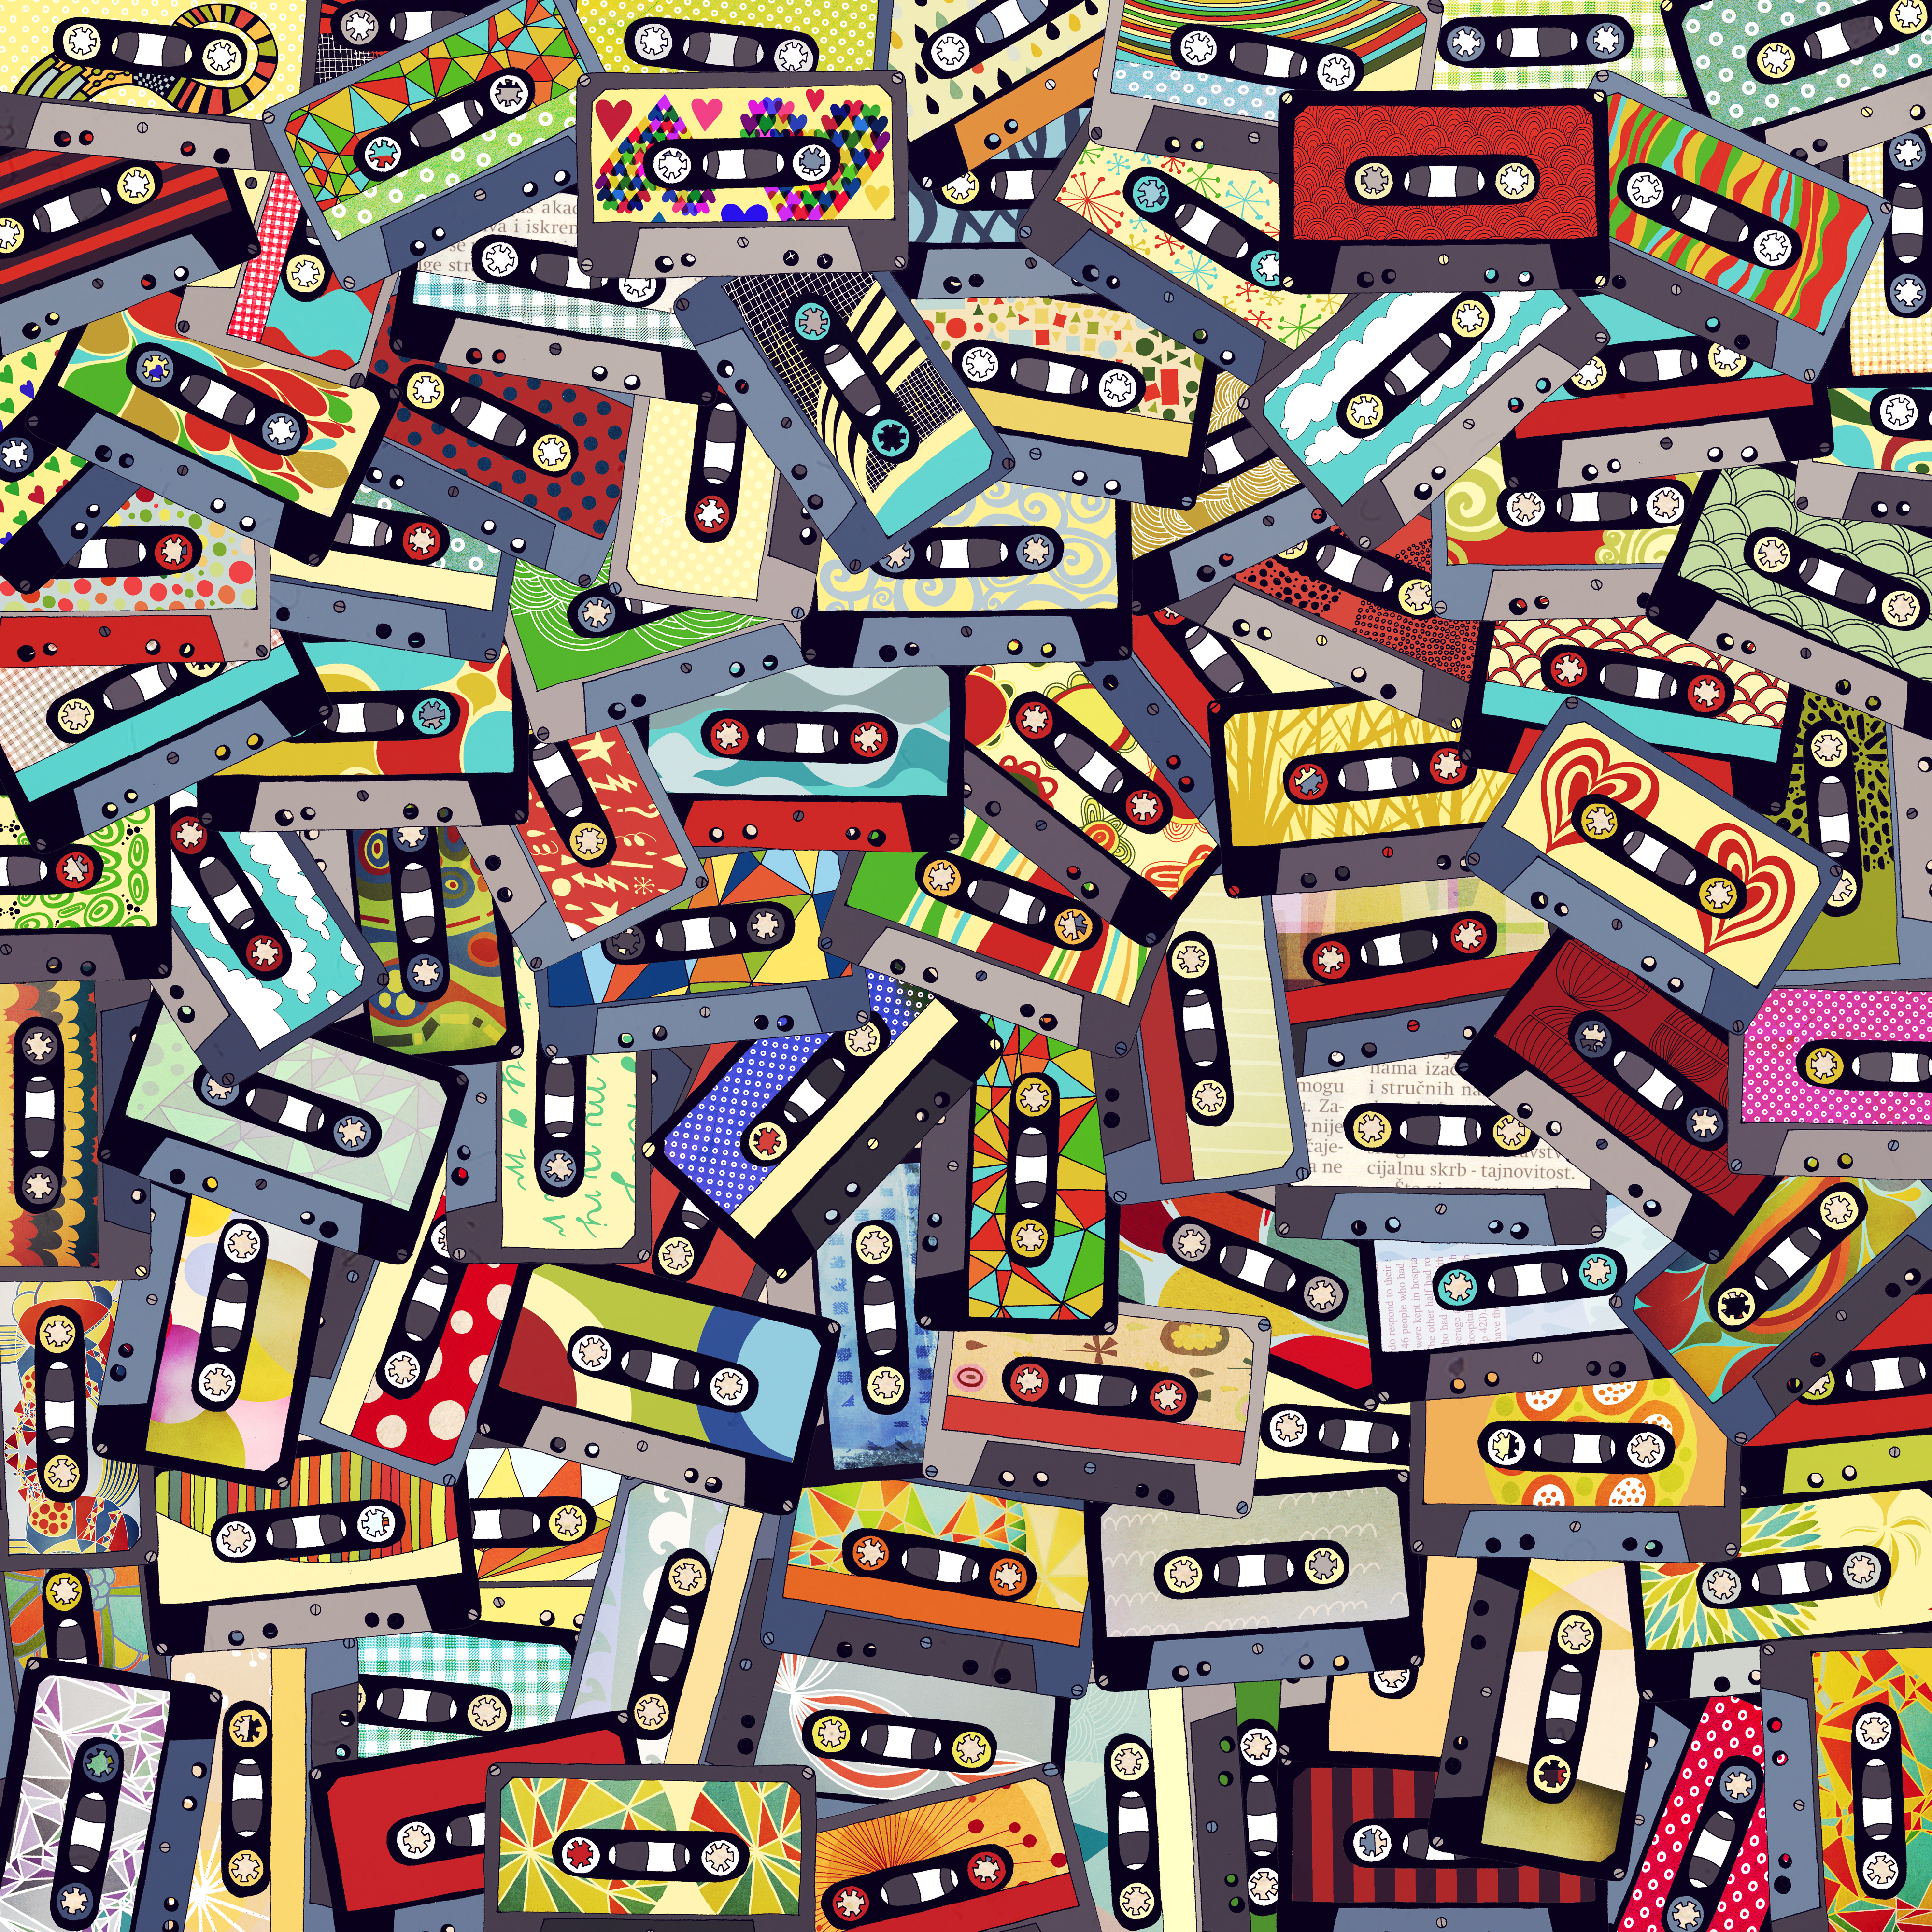 PC Wallpapers music, multicolored, motley, collage, audio cassettes, tape cassettes